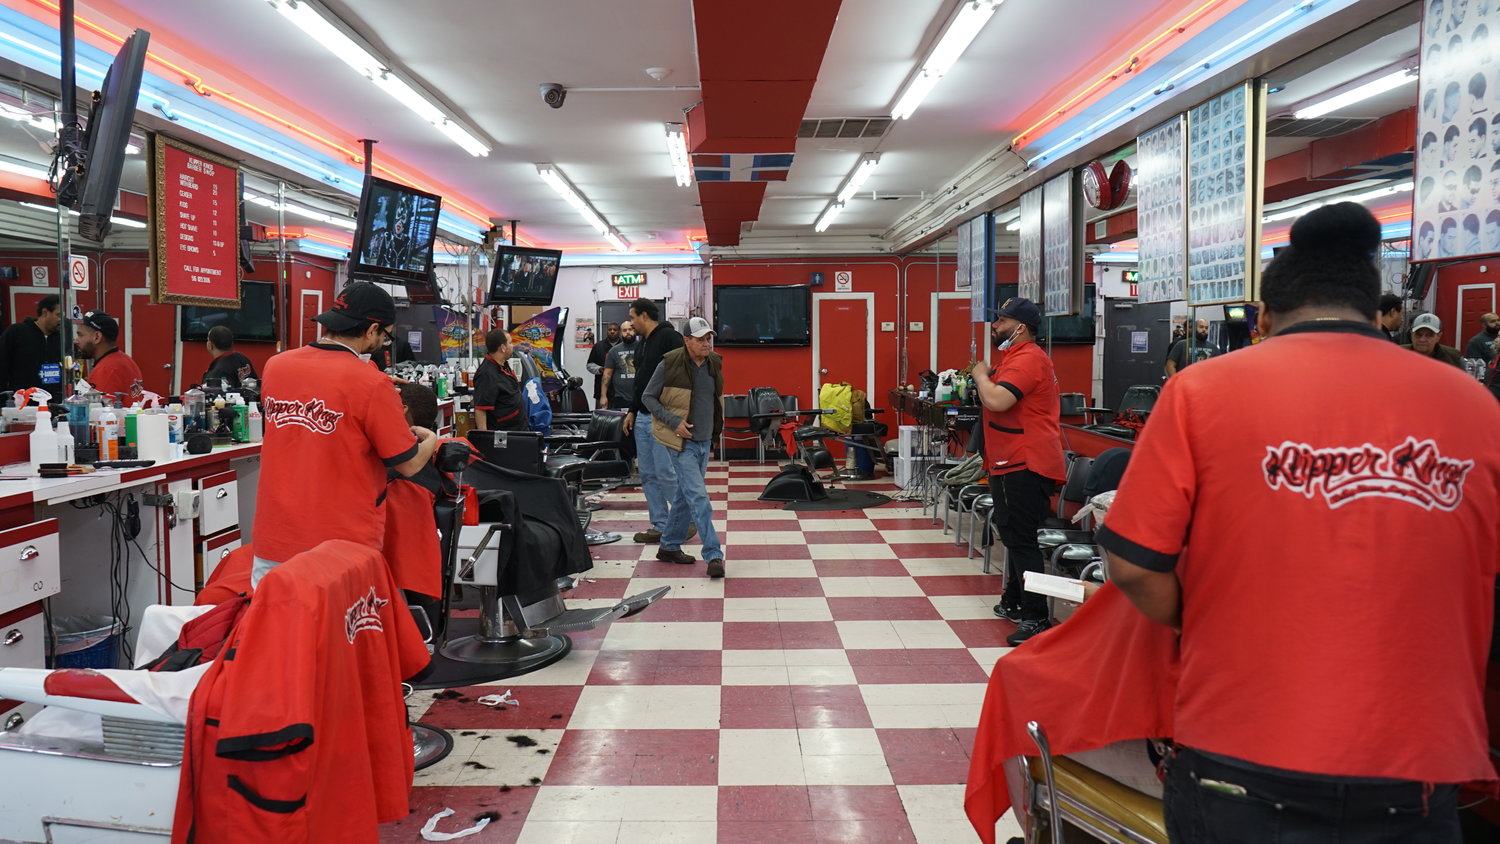 With the barbershop ordered closed indefinitely, Jonathan Diaz, a longtime barber at Klipper Kings on Merrick Road said he wondered how he would feed his child.